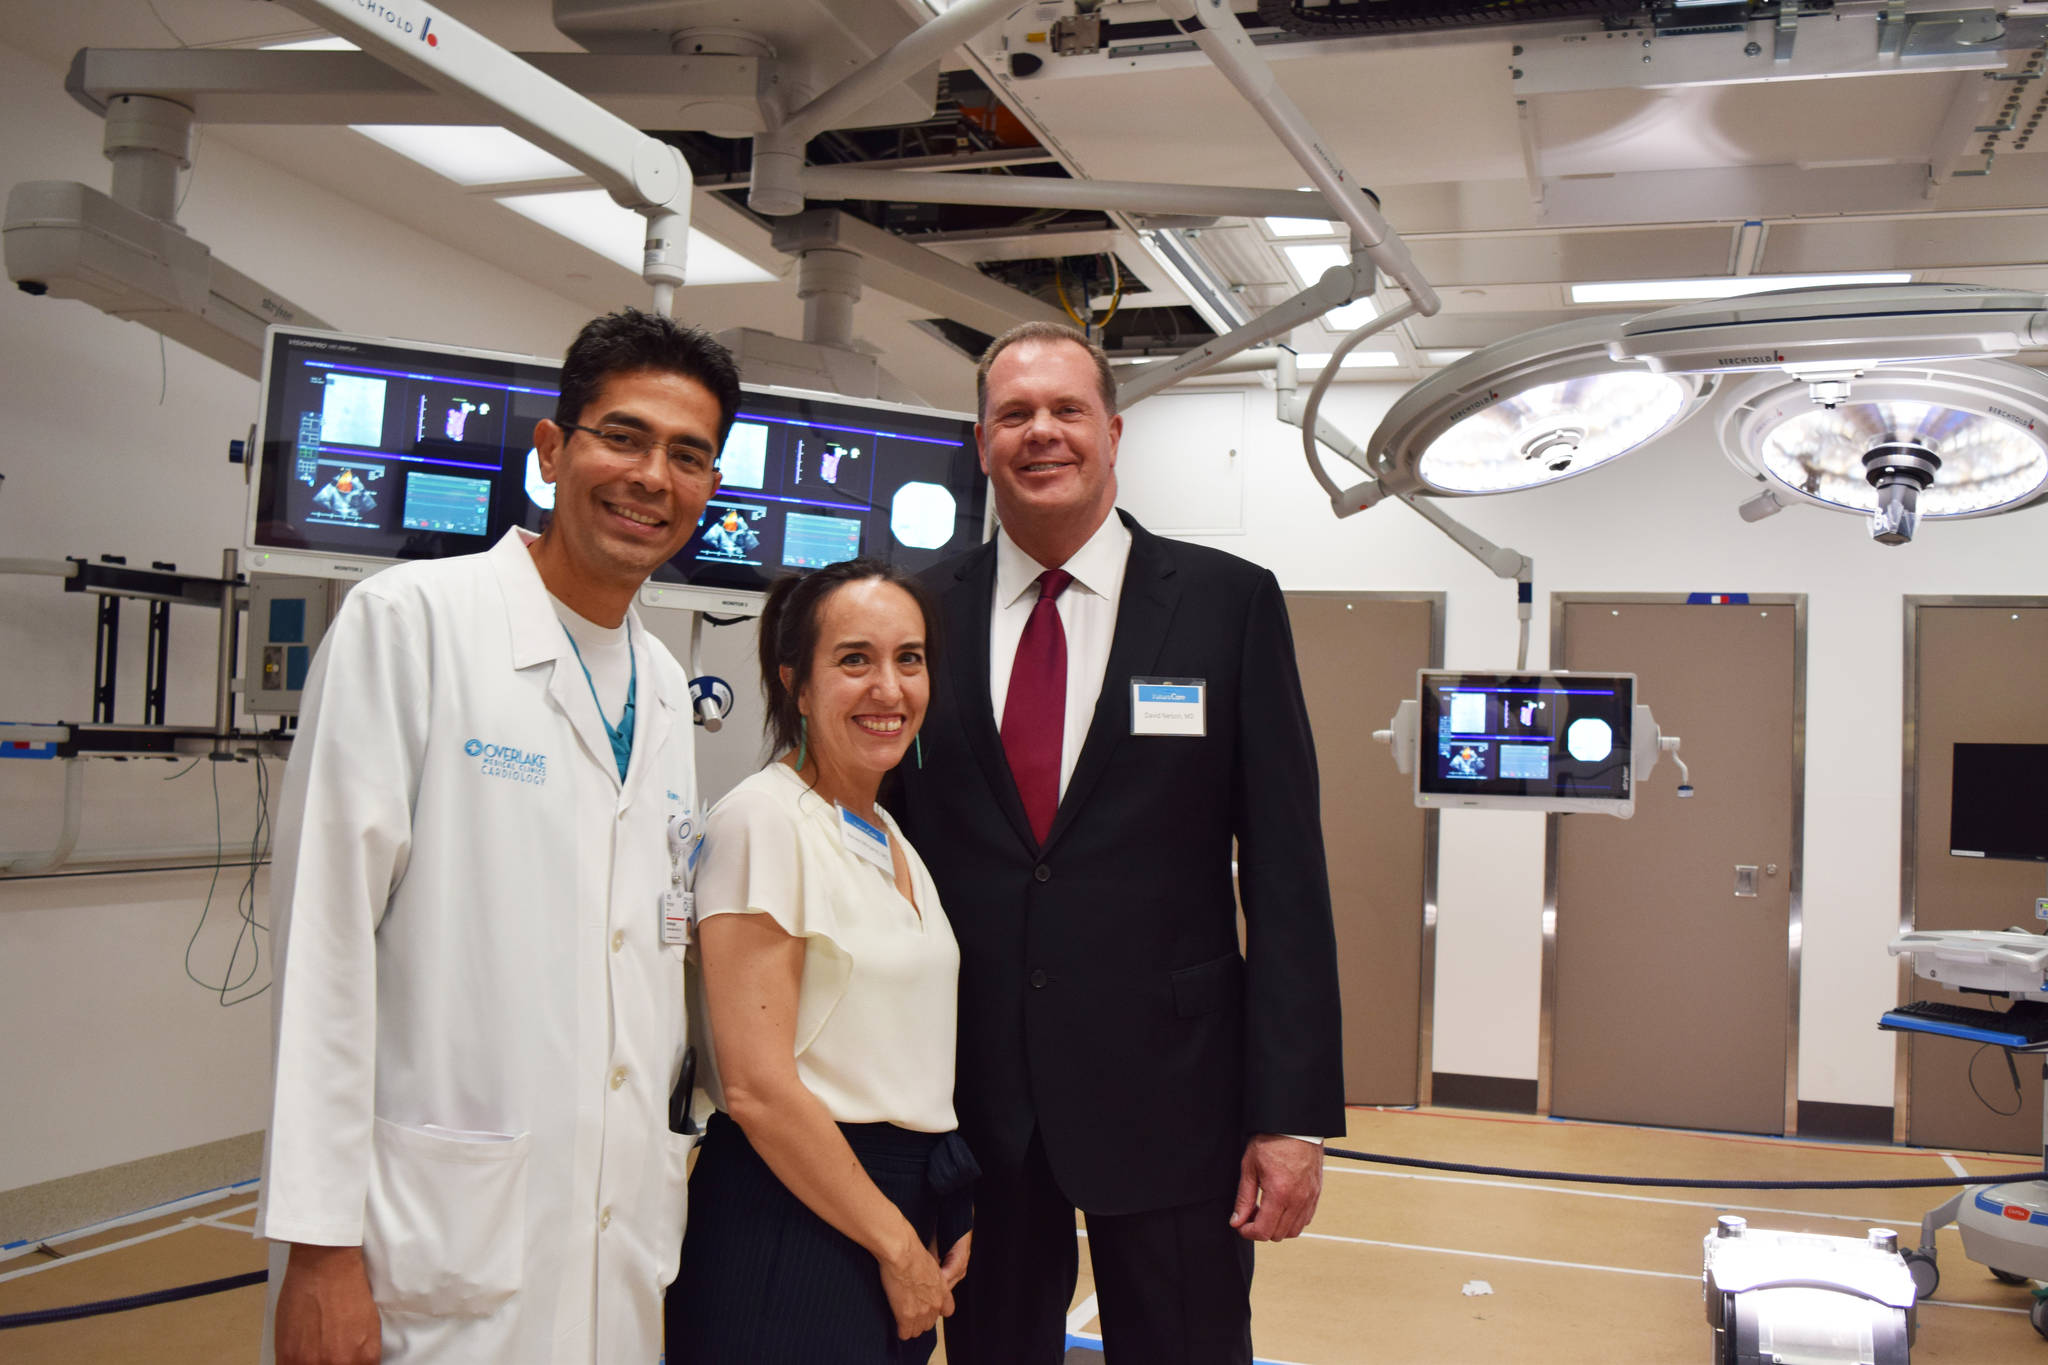 Overlake Hospital’s new operating rooms allow for cutting-edge heart procedures